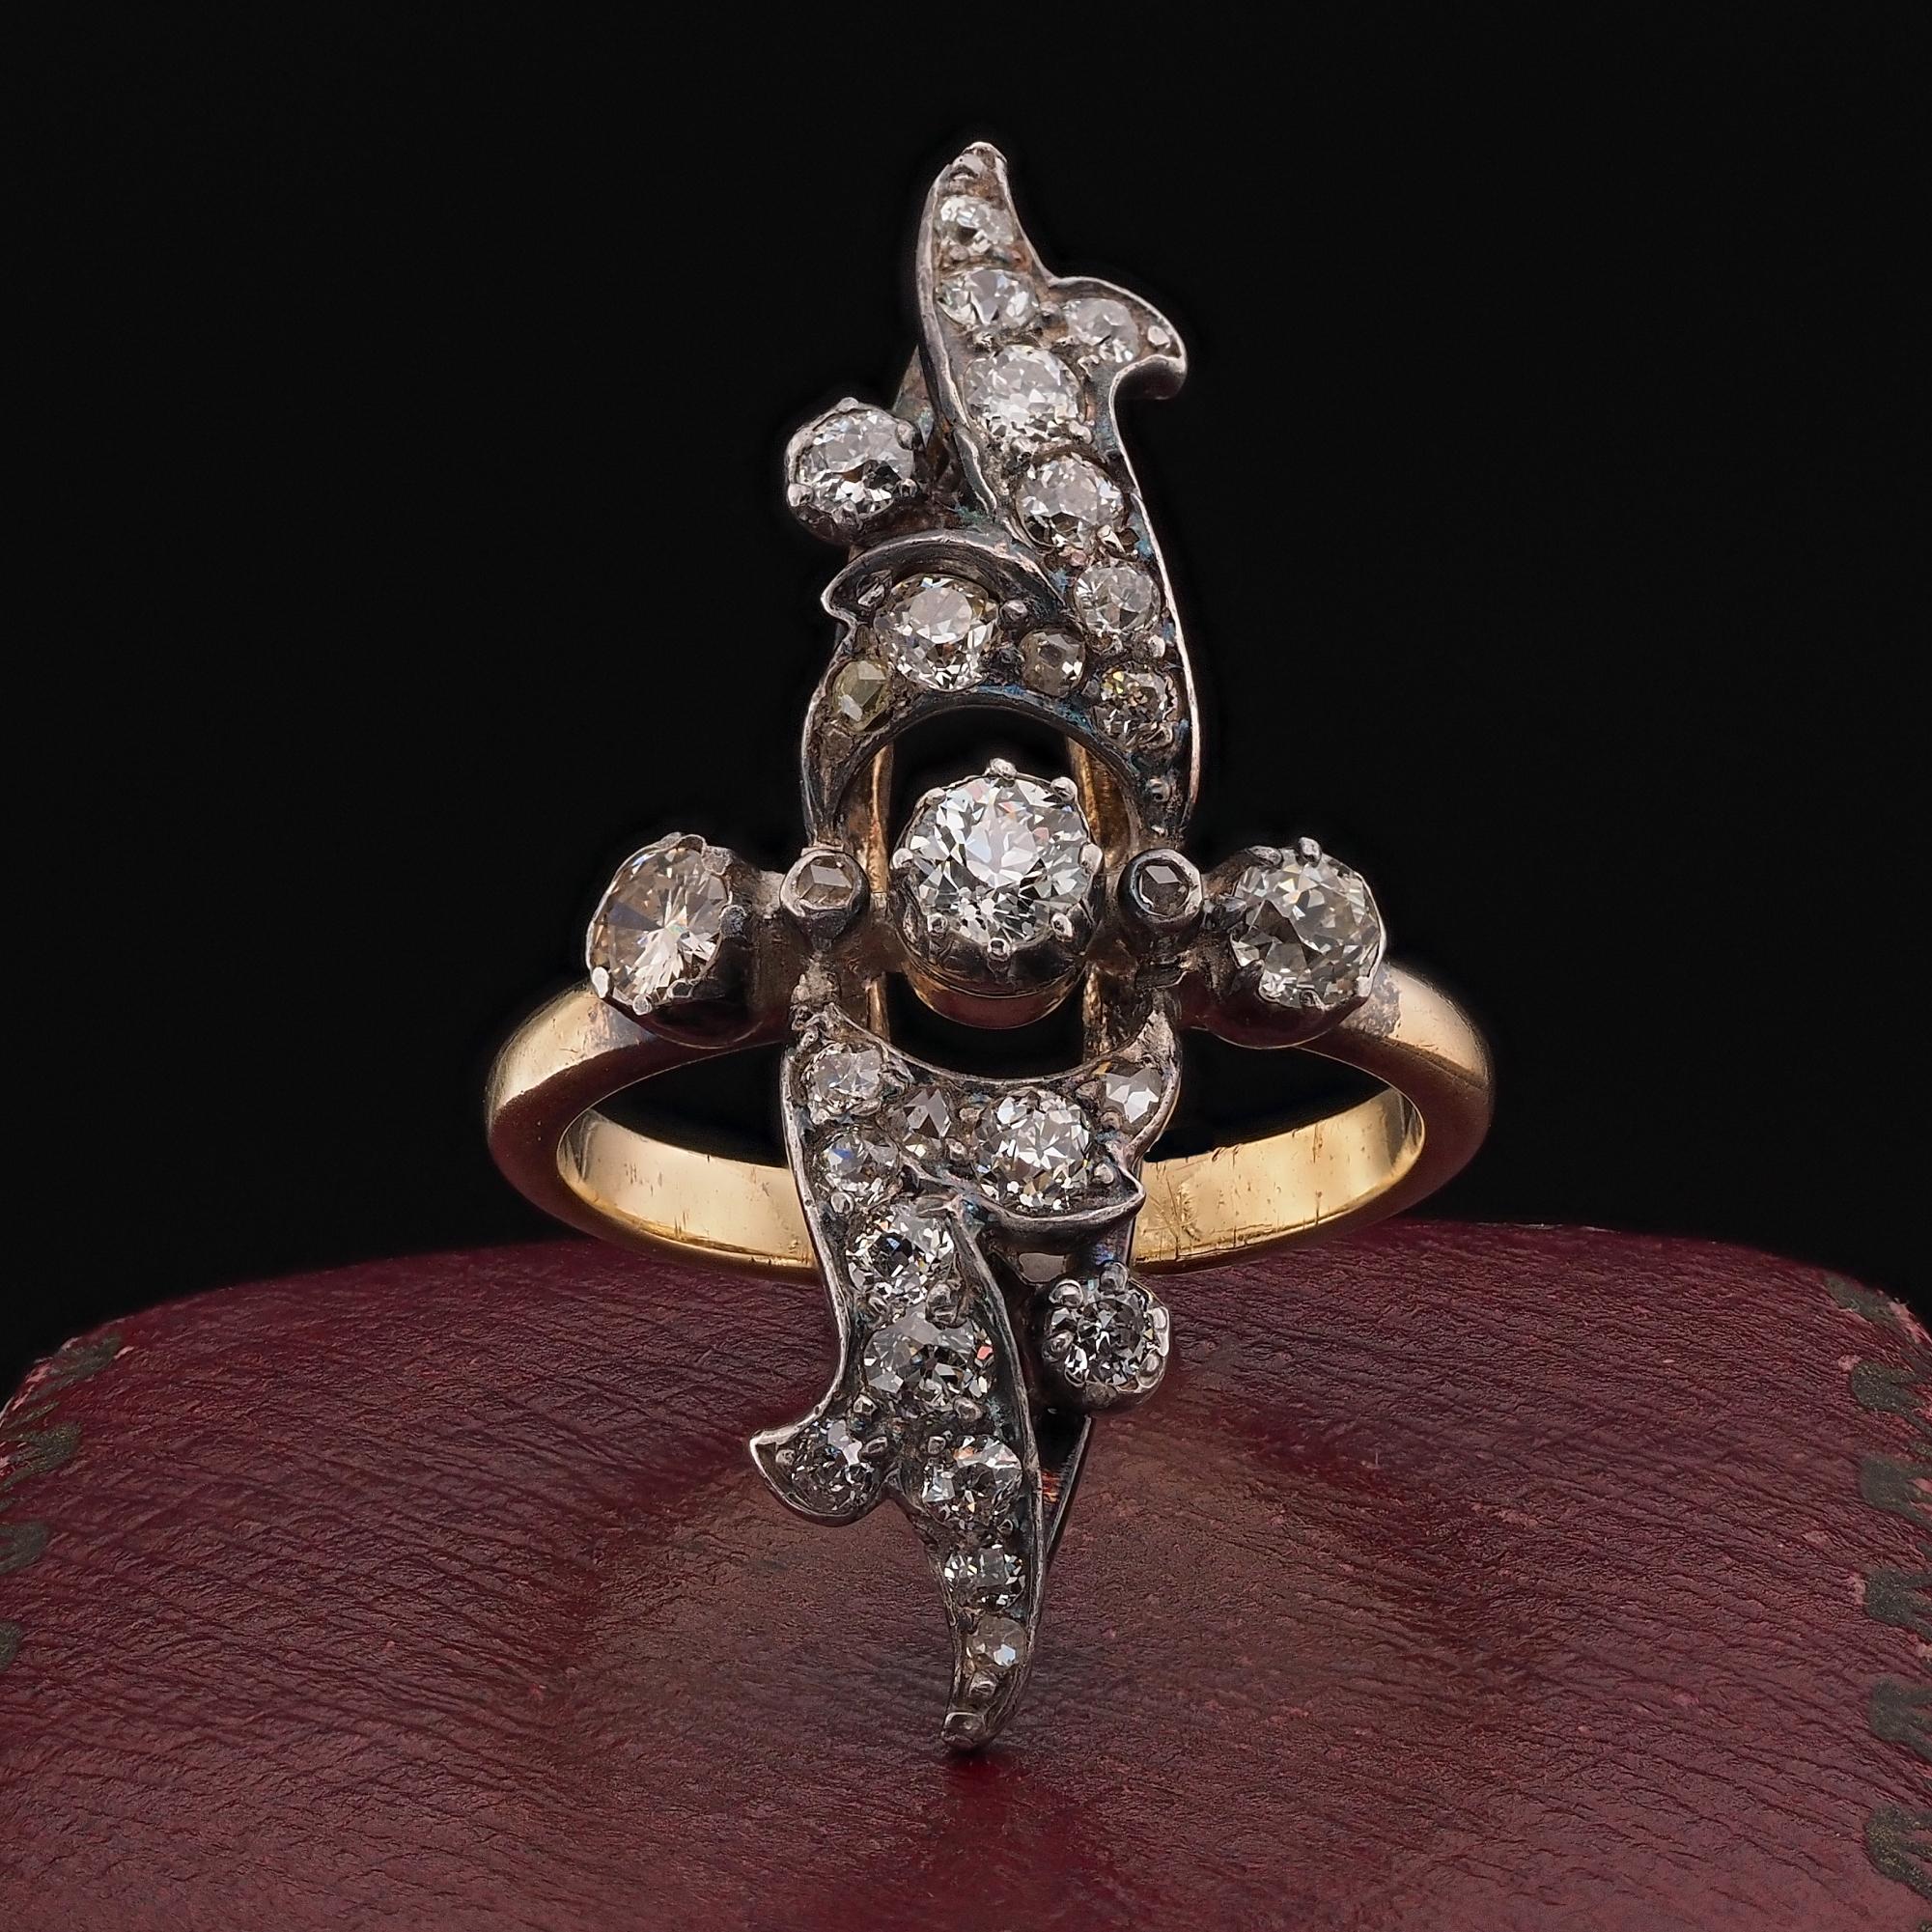 Victorian Statement Ring
Rare and very unique is this one of a kind Navette ring dating 1880 ca
Hand crafted of solid 18 Kt gold silver topped for the diamond housing
Bears French assay hallmark
Elaborate, elongated design which stands on finger to